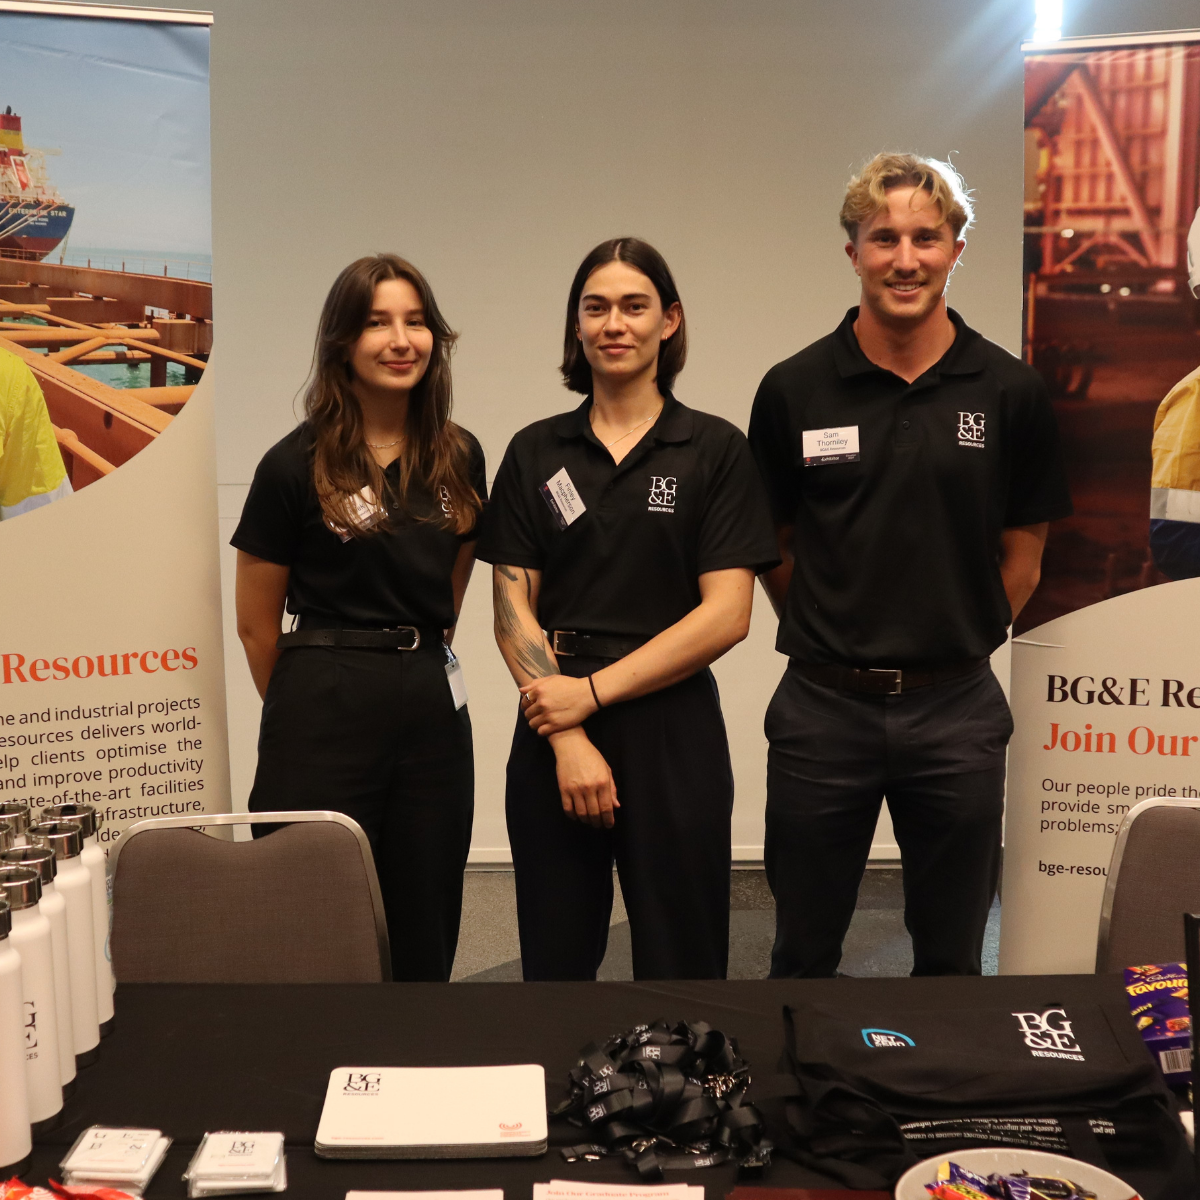 Elevating Opportunities at the Engineers Australia Career Expo